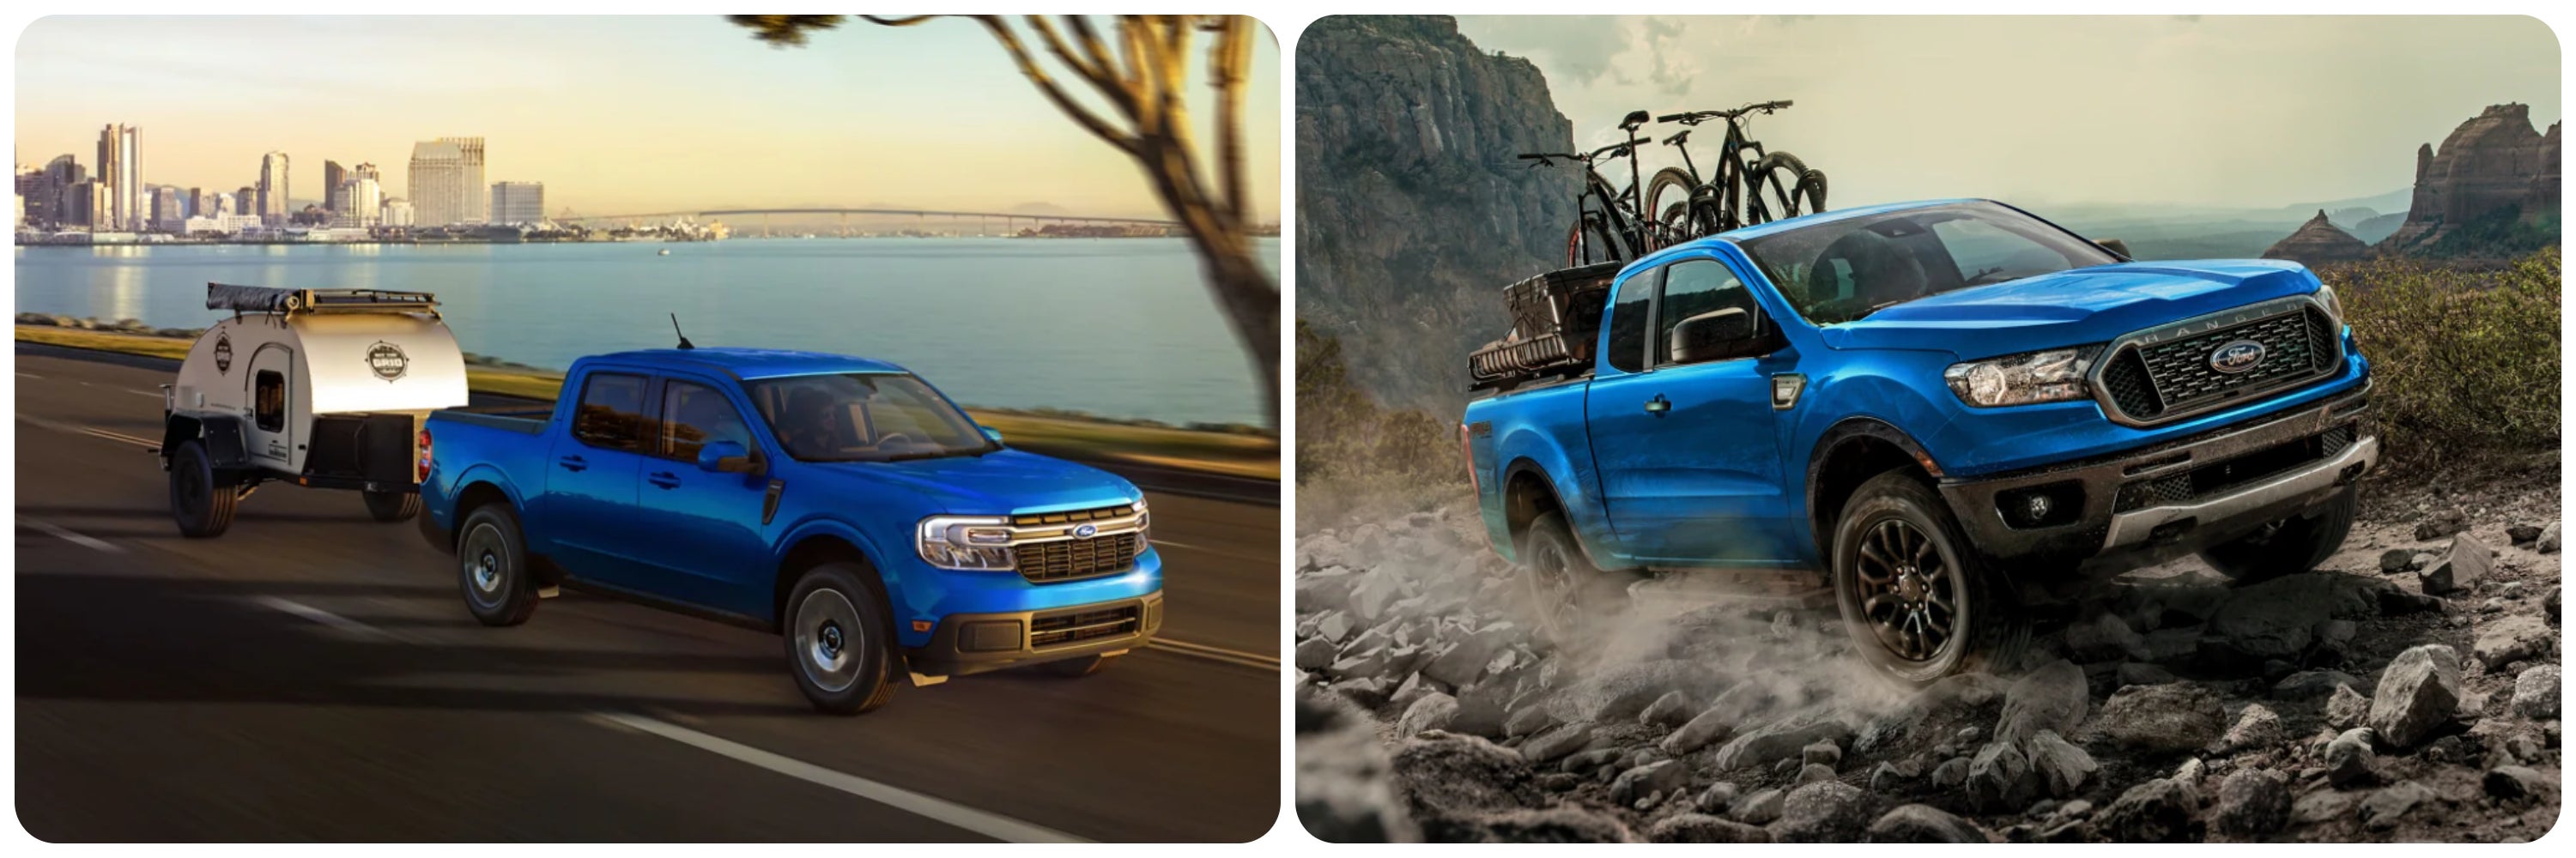 On the left, a blue 2023 Ford Maverick drives down a street hauling a small camper. On the right a 2023 Ford Ranger Supercrew loaded with mountain bikes drives across rocky terrain.